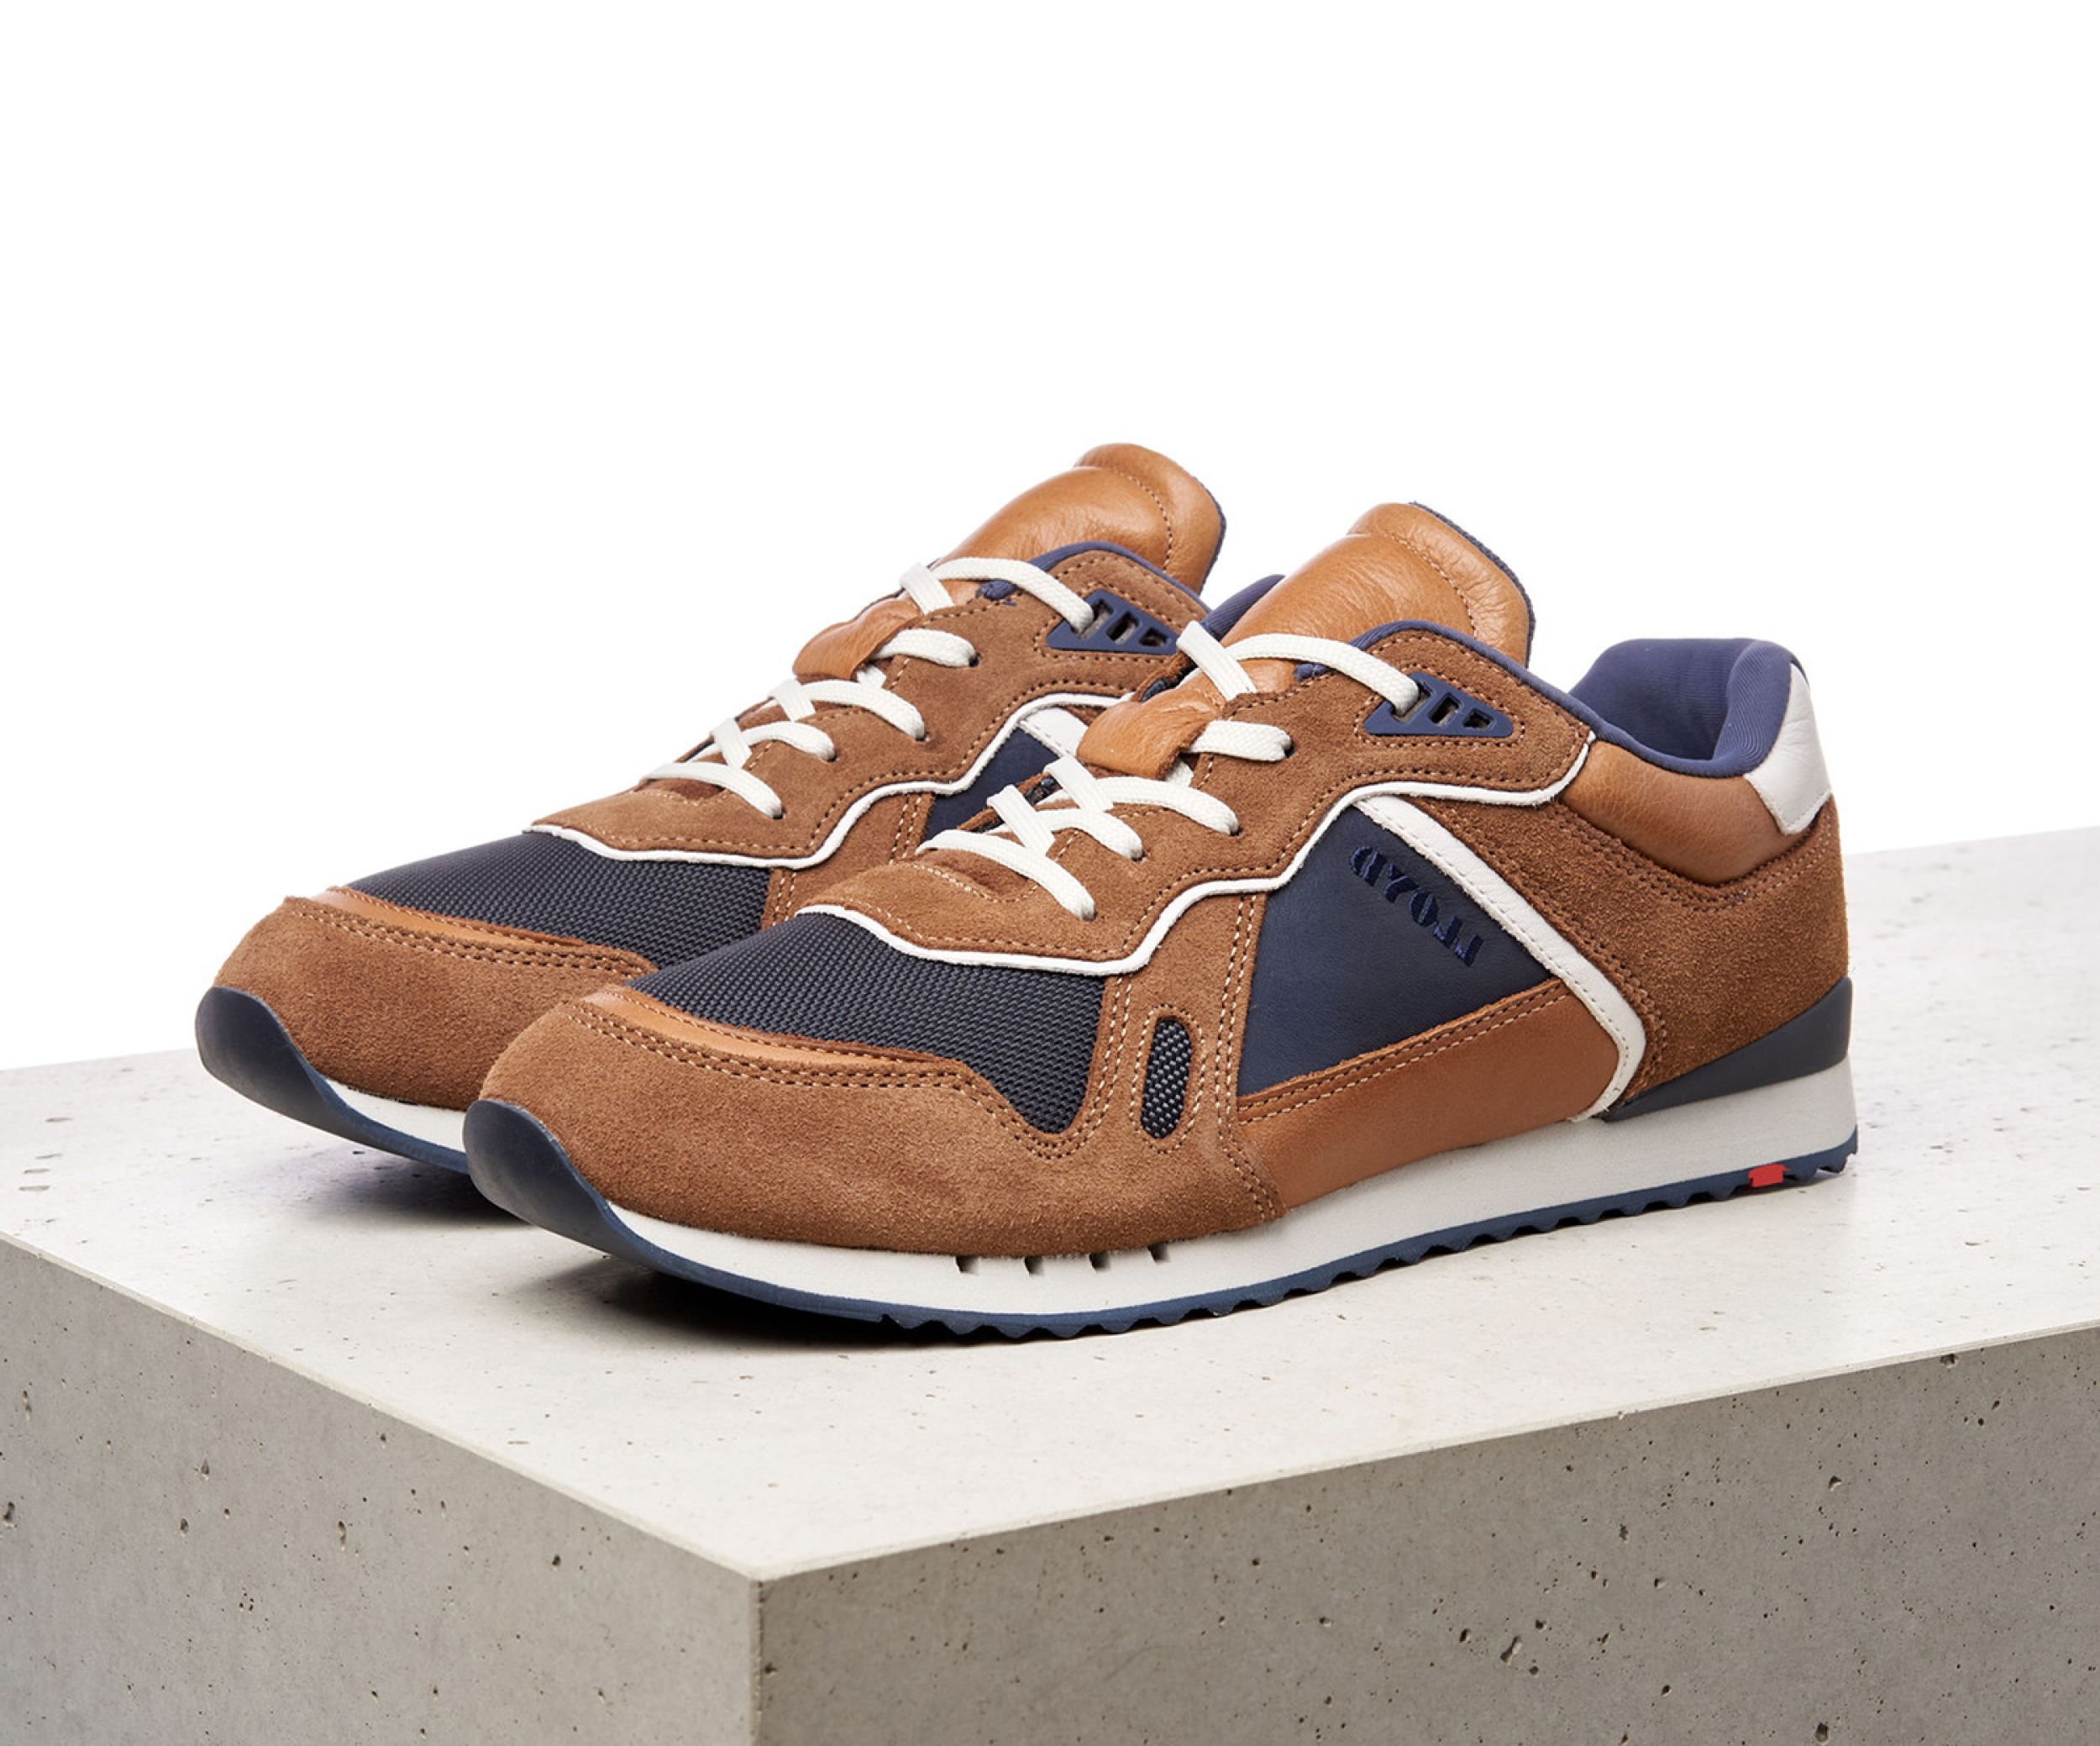 Ronnie Fieg Frank Lloyd Wright Foundation U998 Broadacre City Apricot Aloe  Wash Running Shoes For Mens Sports Shoe Womens Sneakers Mens Trainers  Womens U998KT1 From Sneakersx, $69.38 | DHgate.Com